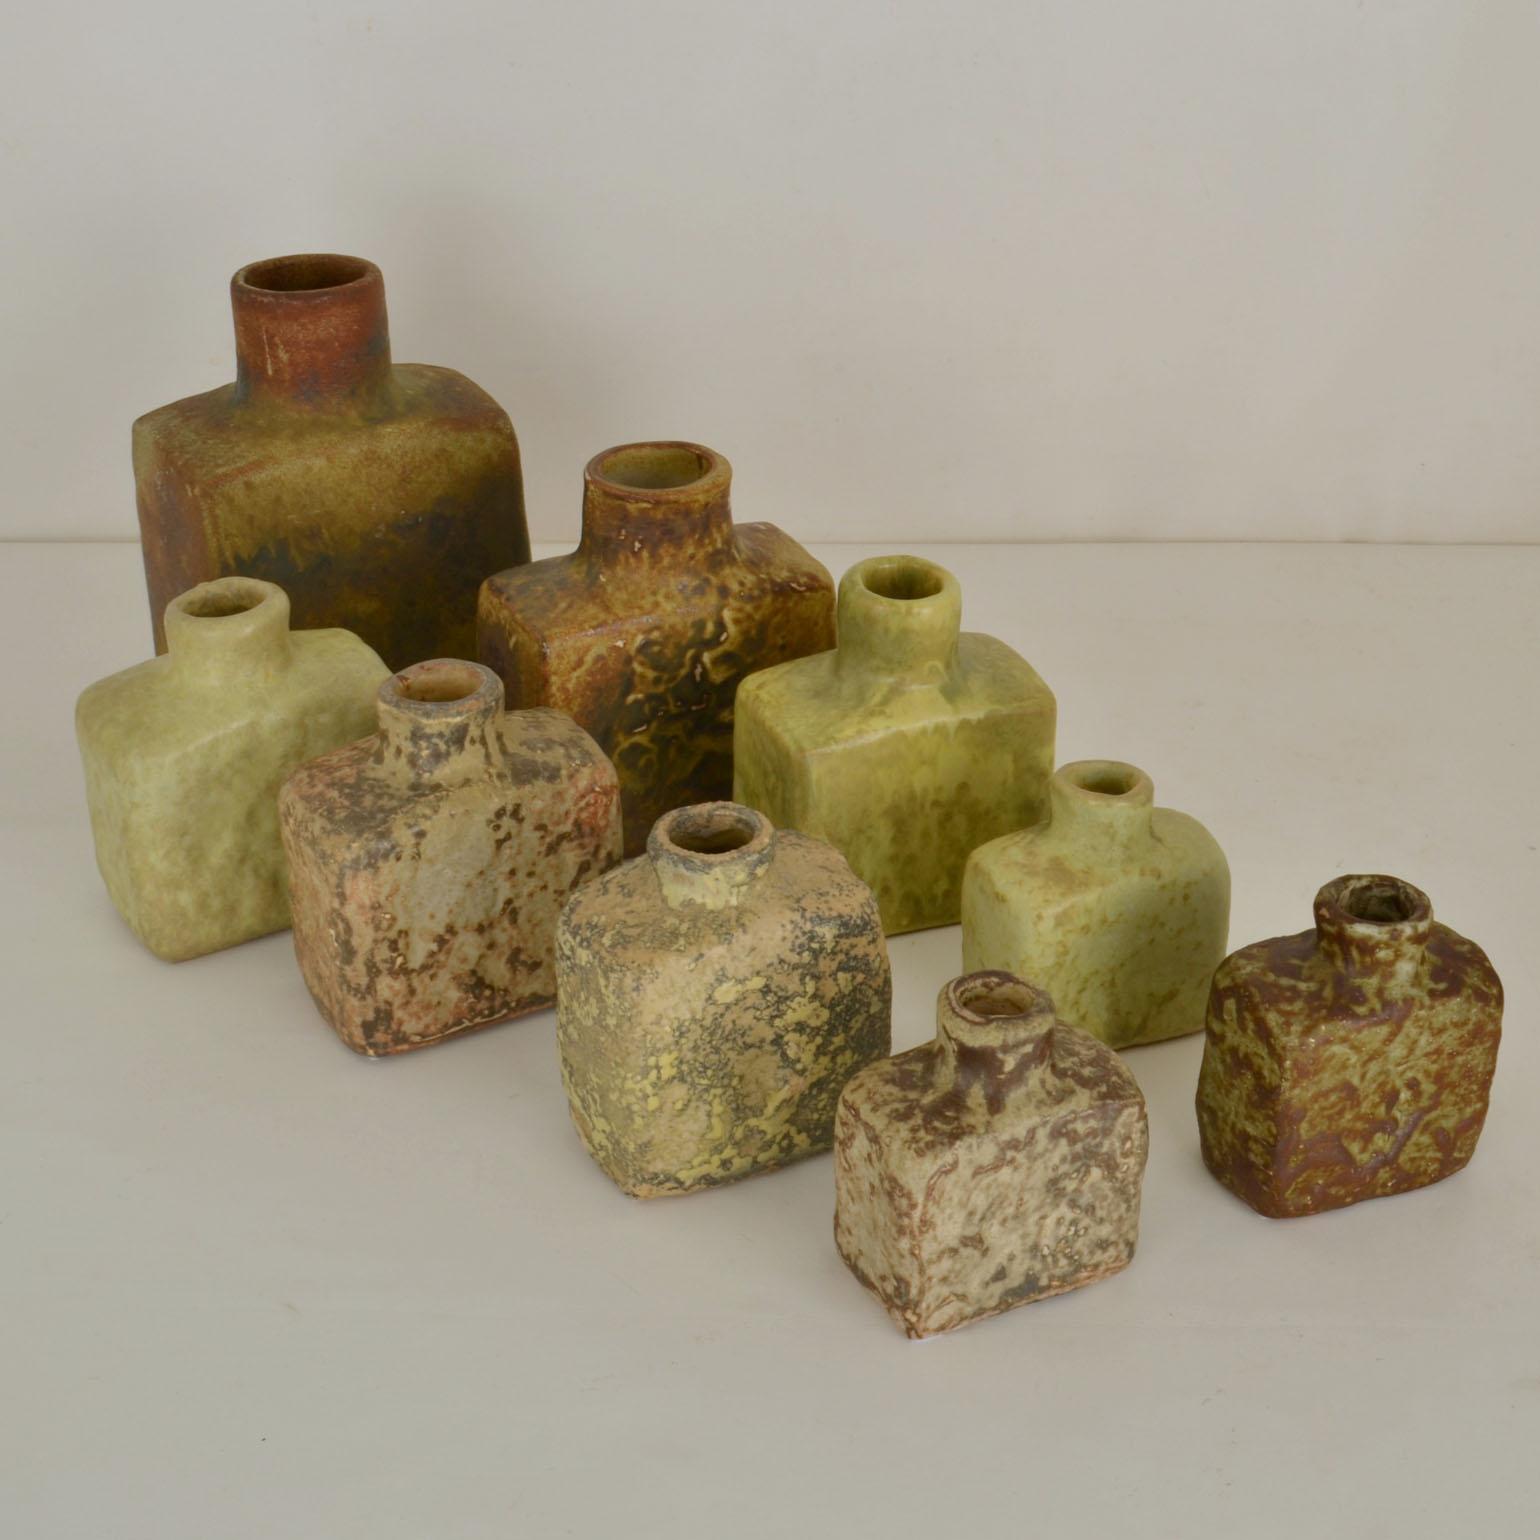 Group of Square Studio Ceramic Vases in Sage and Earth Tones In Excellent Condition For Sale In London, GB